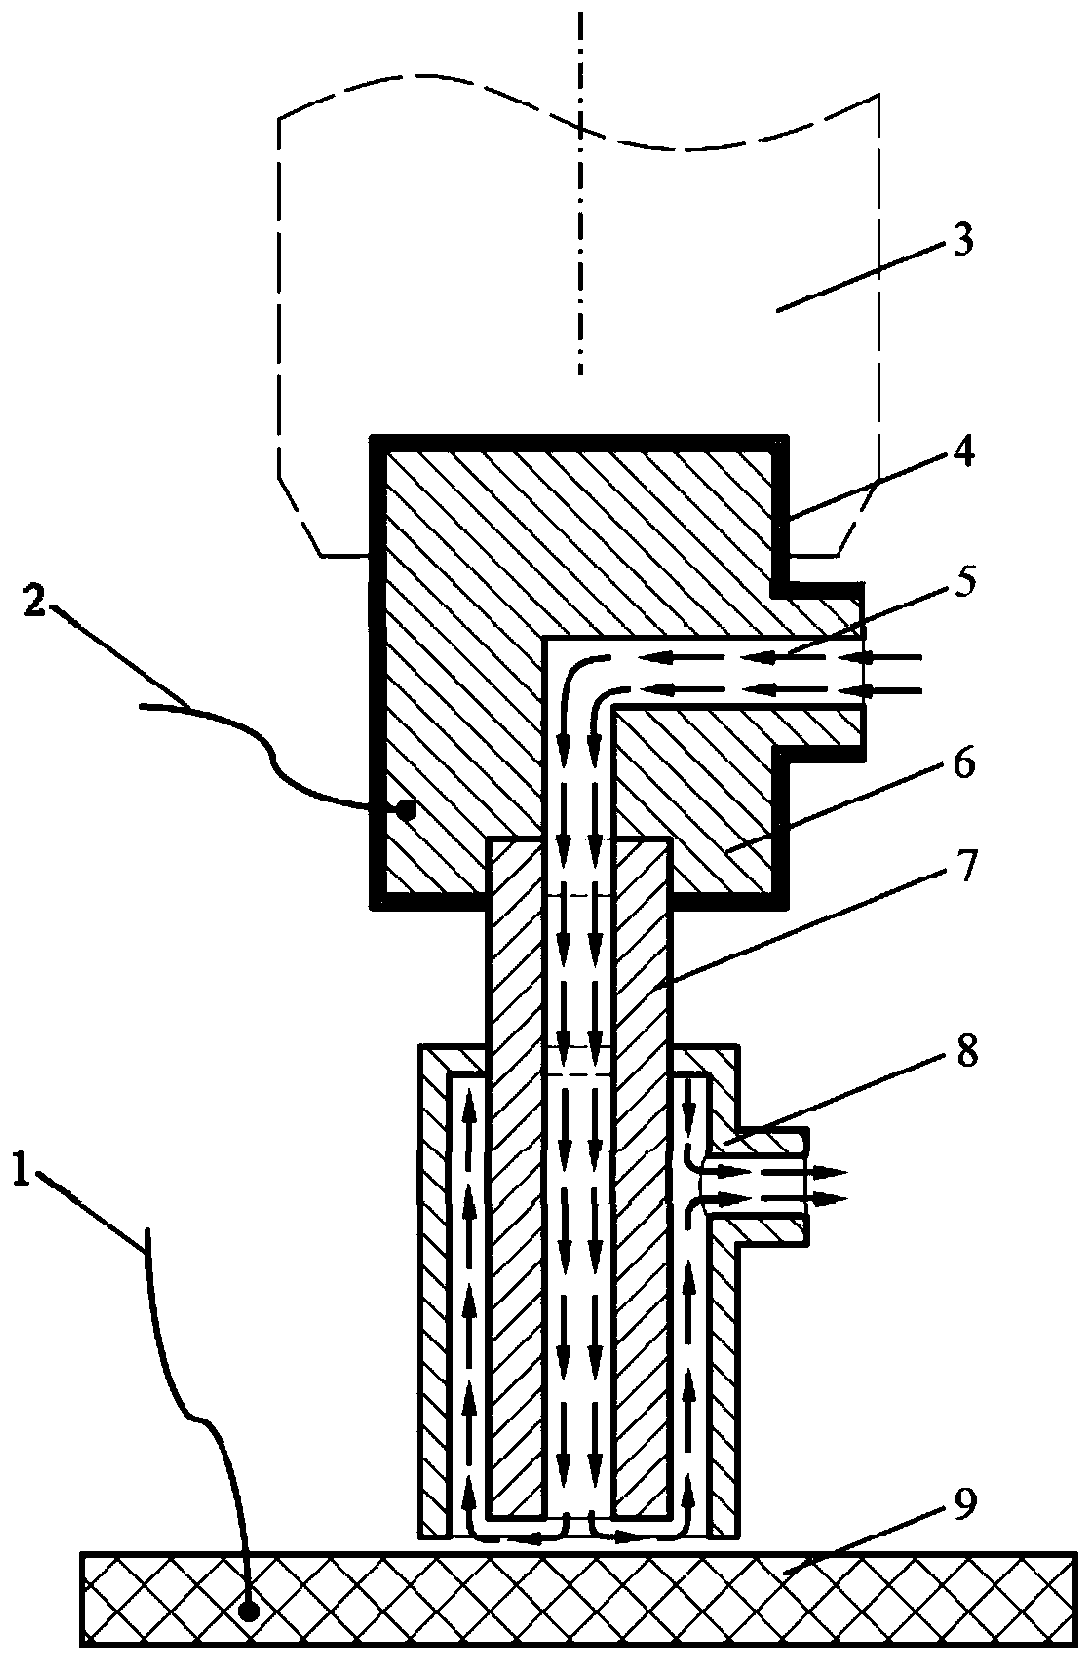 A scanning micro-arc oxidation treatment device and method